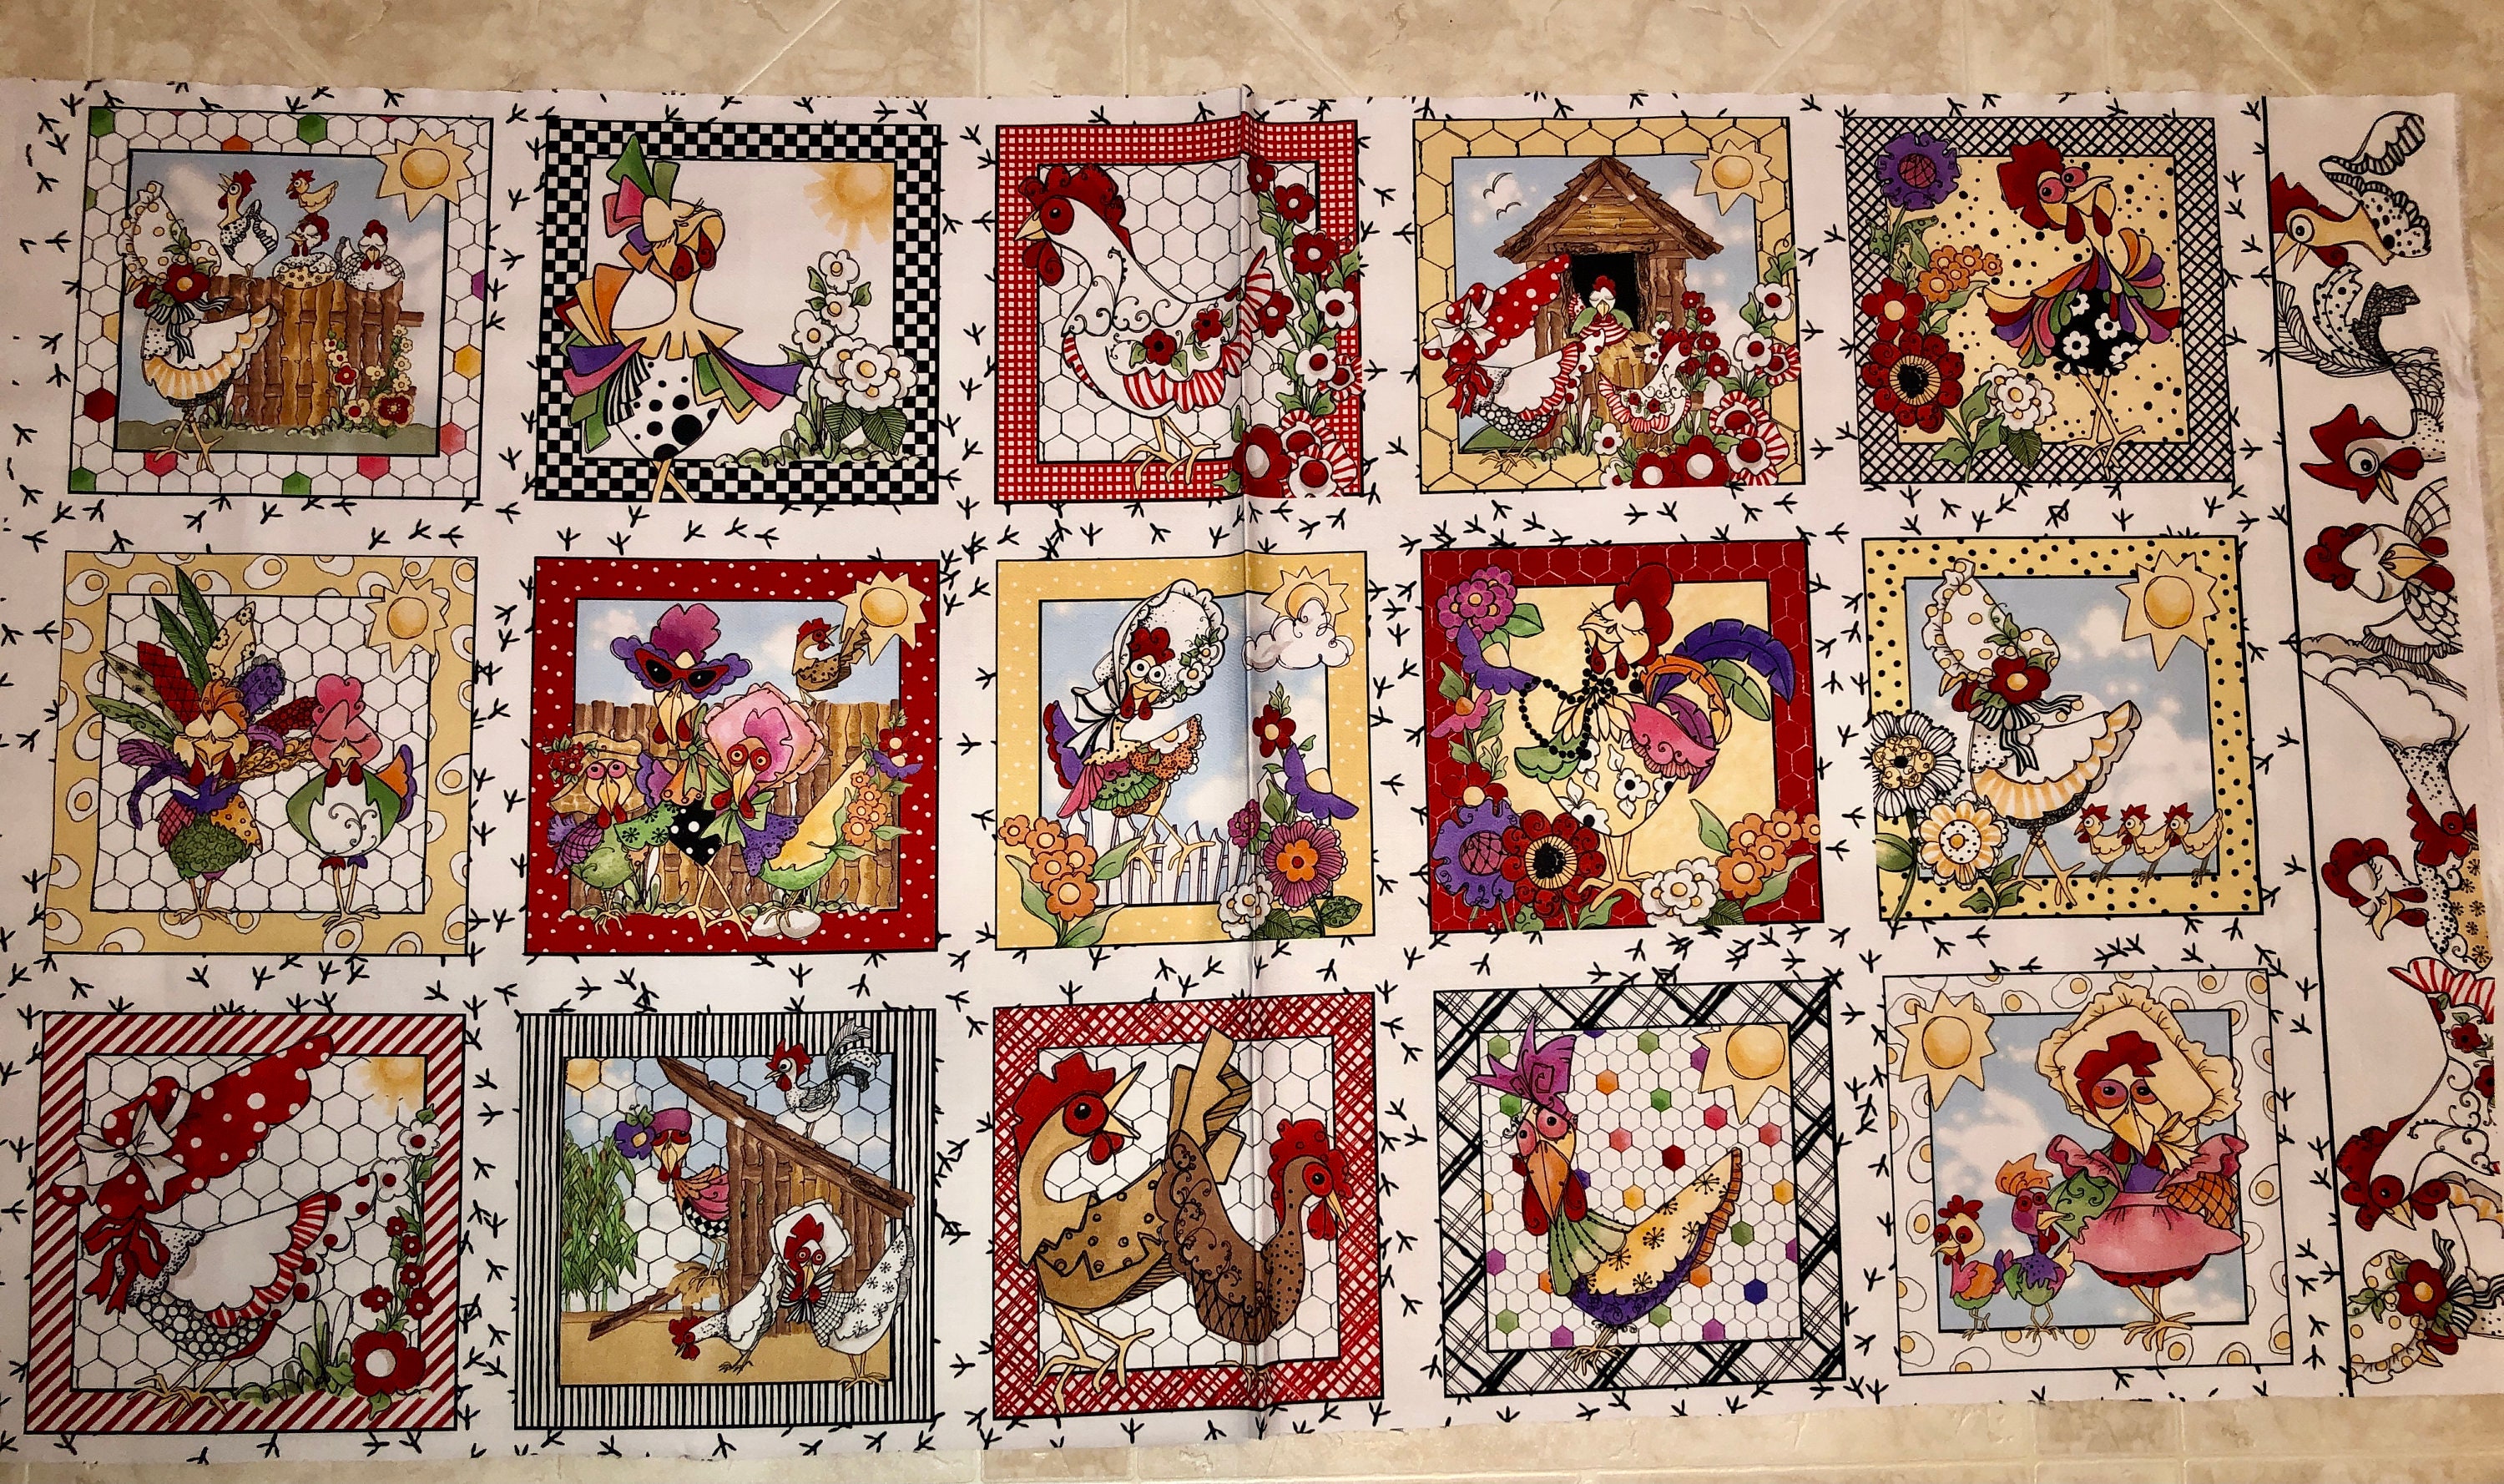 Floral CHICKEN WIRE Edge to Edge QUILT Block Fits a 4x4, 5x5 6x6